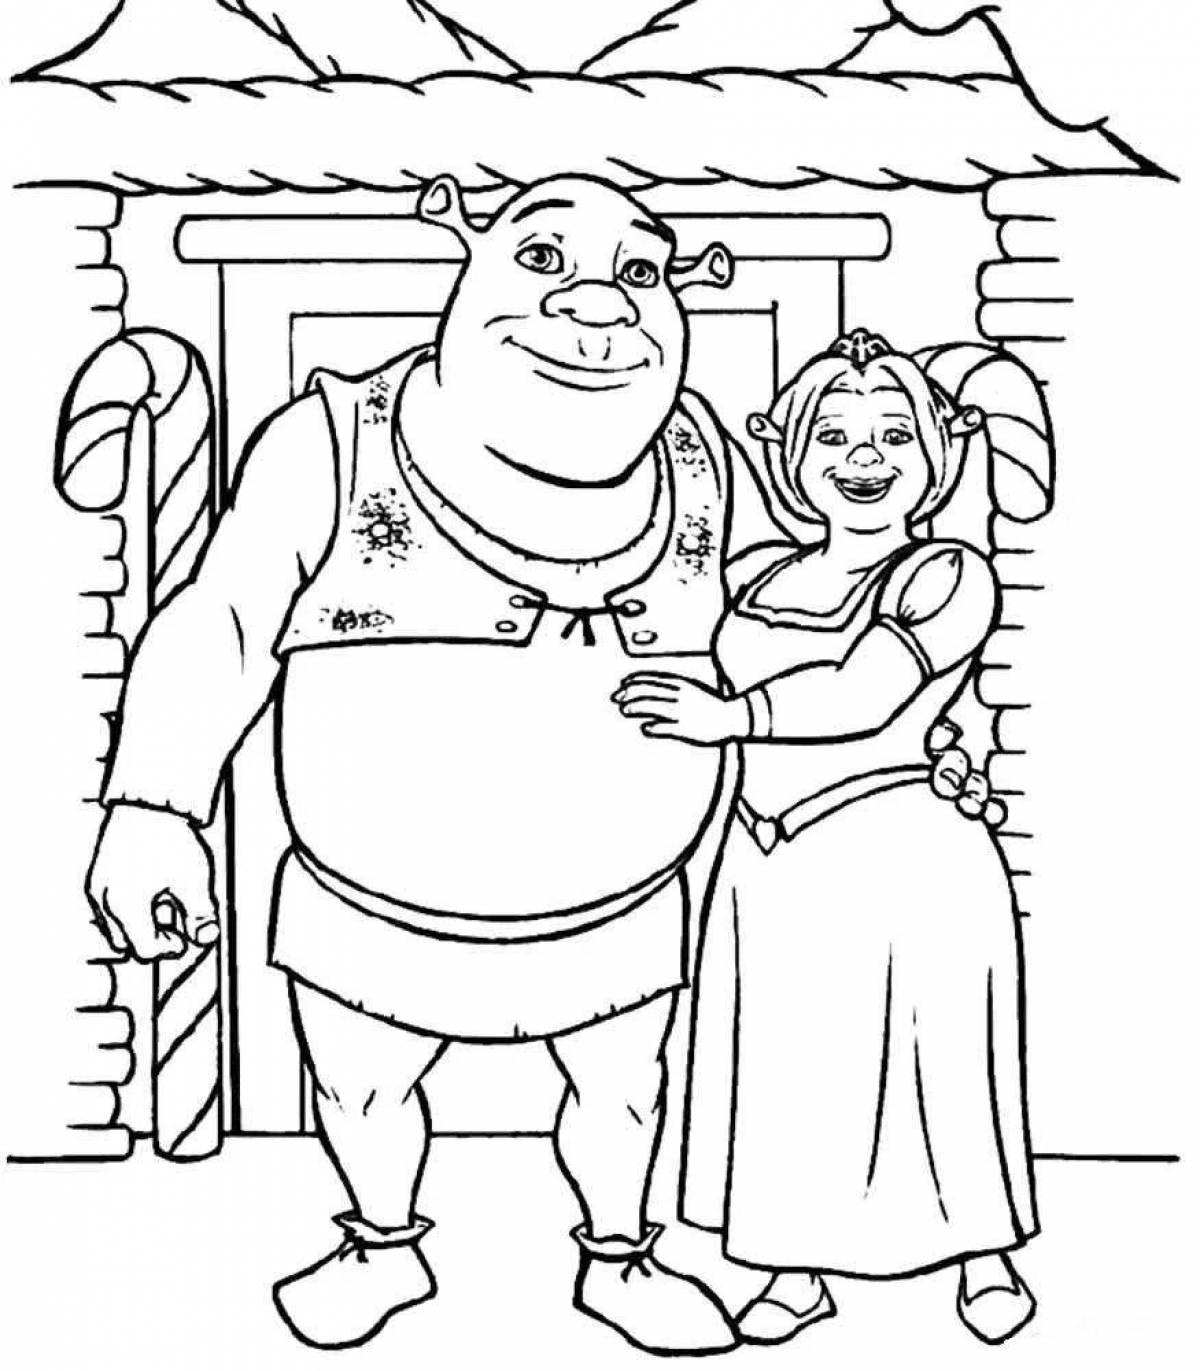 Animated shrek and fiona coloring book